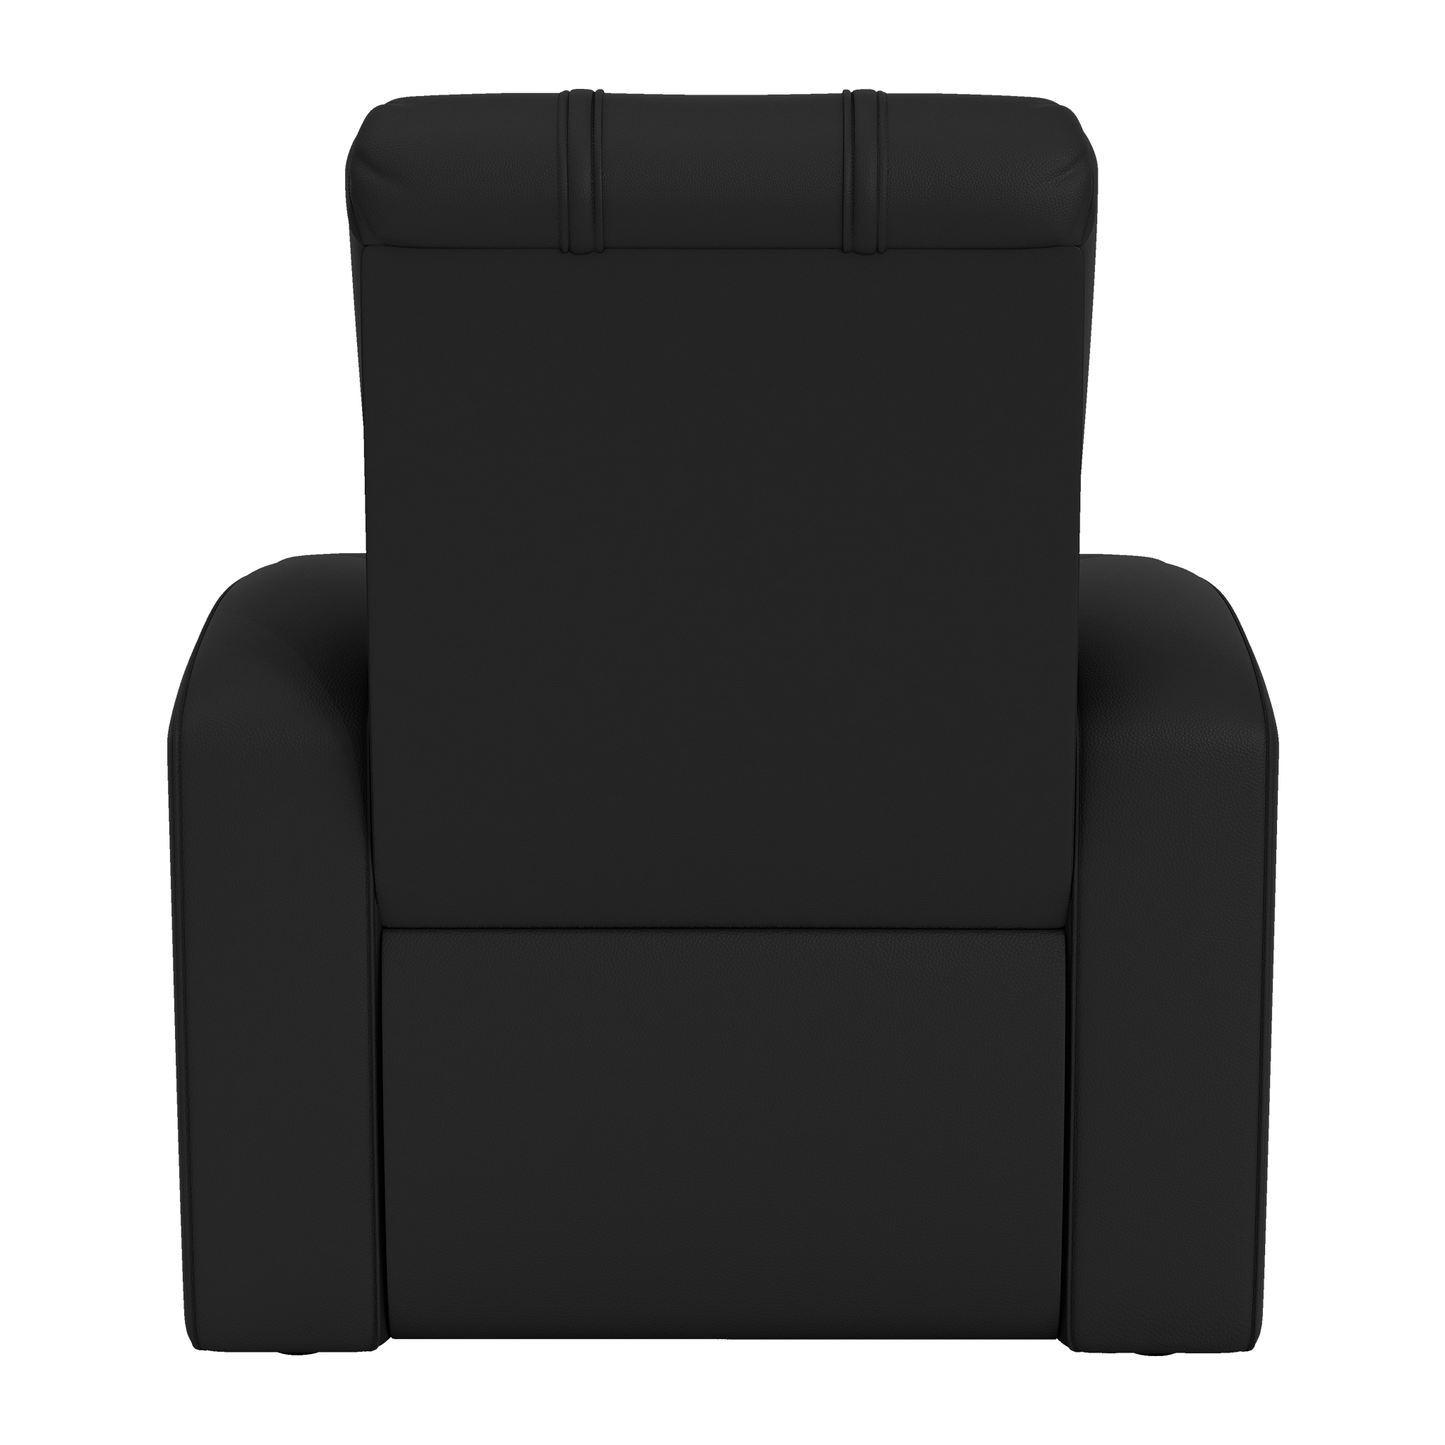 Relax Home Theater Recliner with Georgia Tech Yellow Jackets Buzz Logo